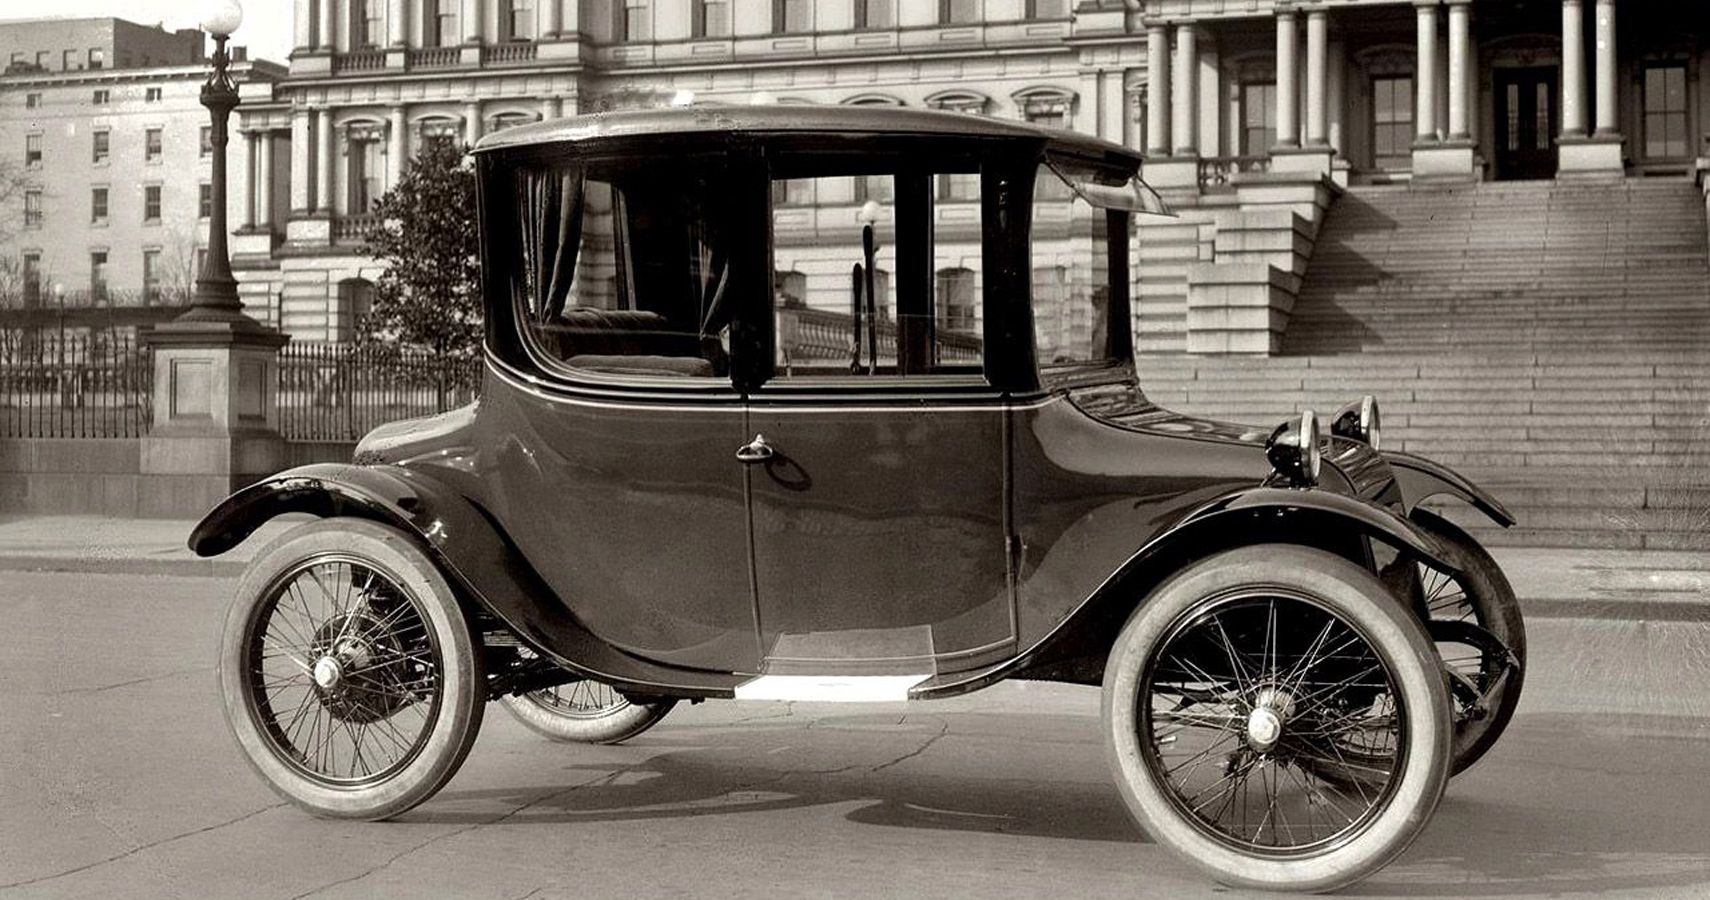 The Detroit Electric, so made by Anderson Electric Car Company